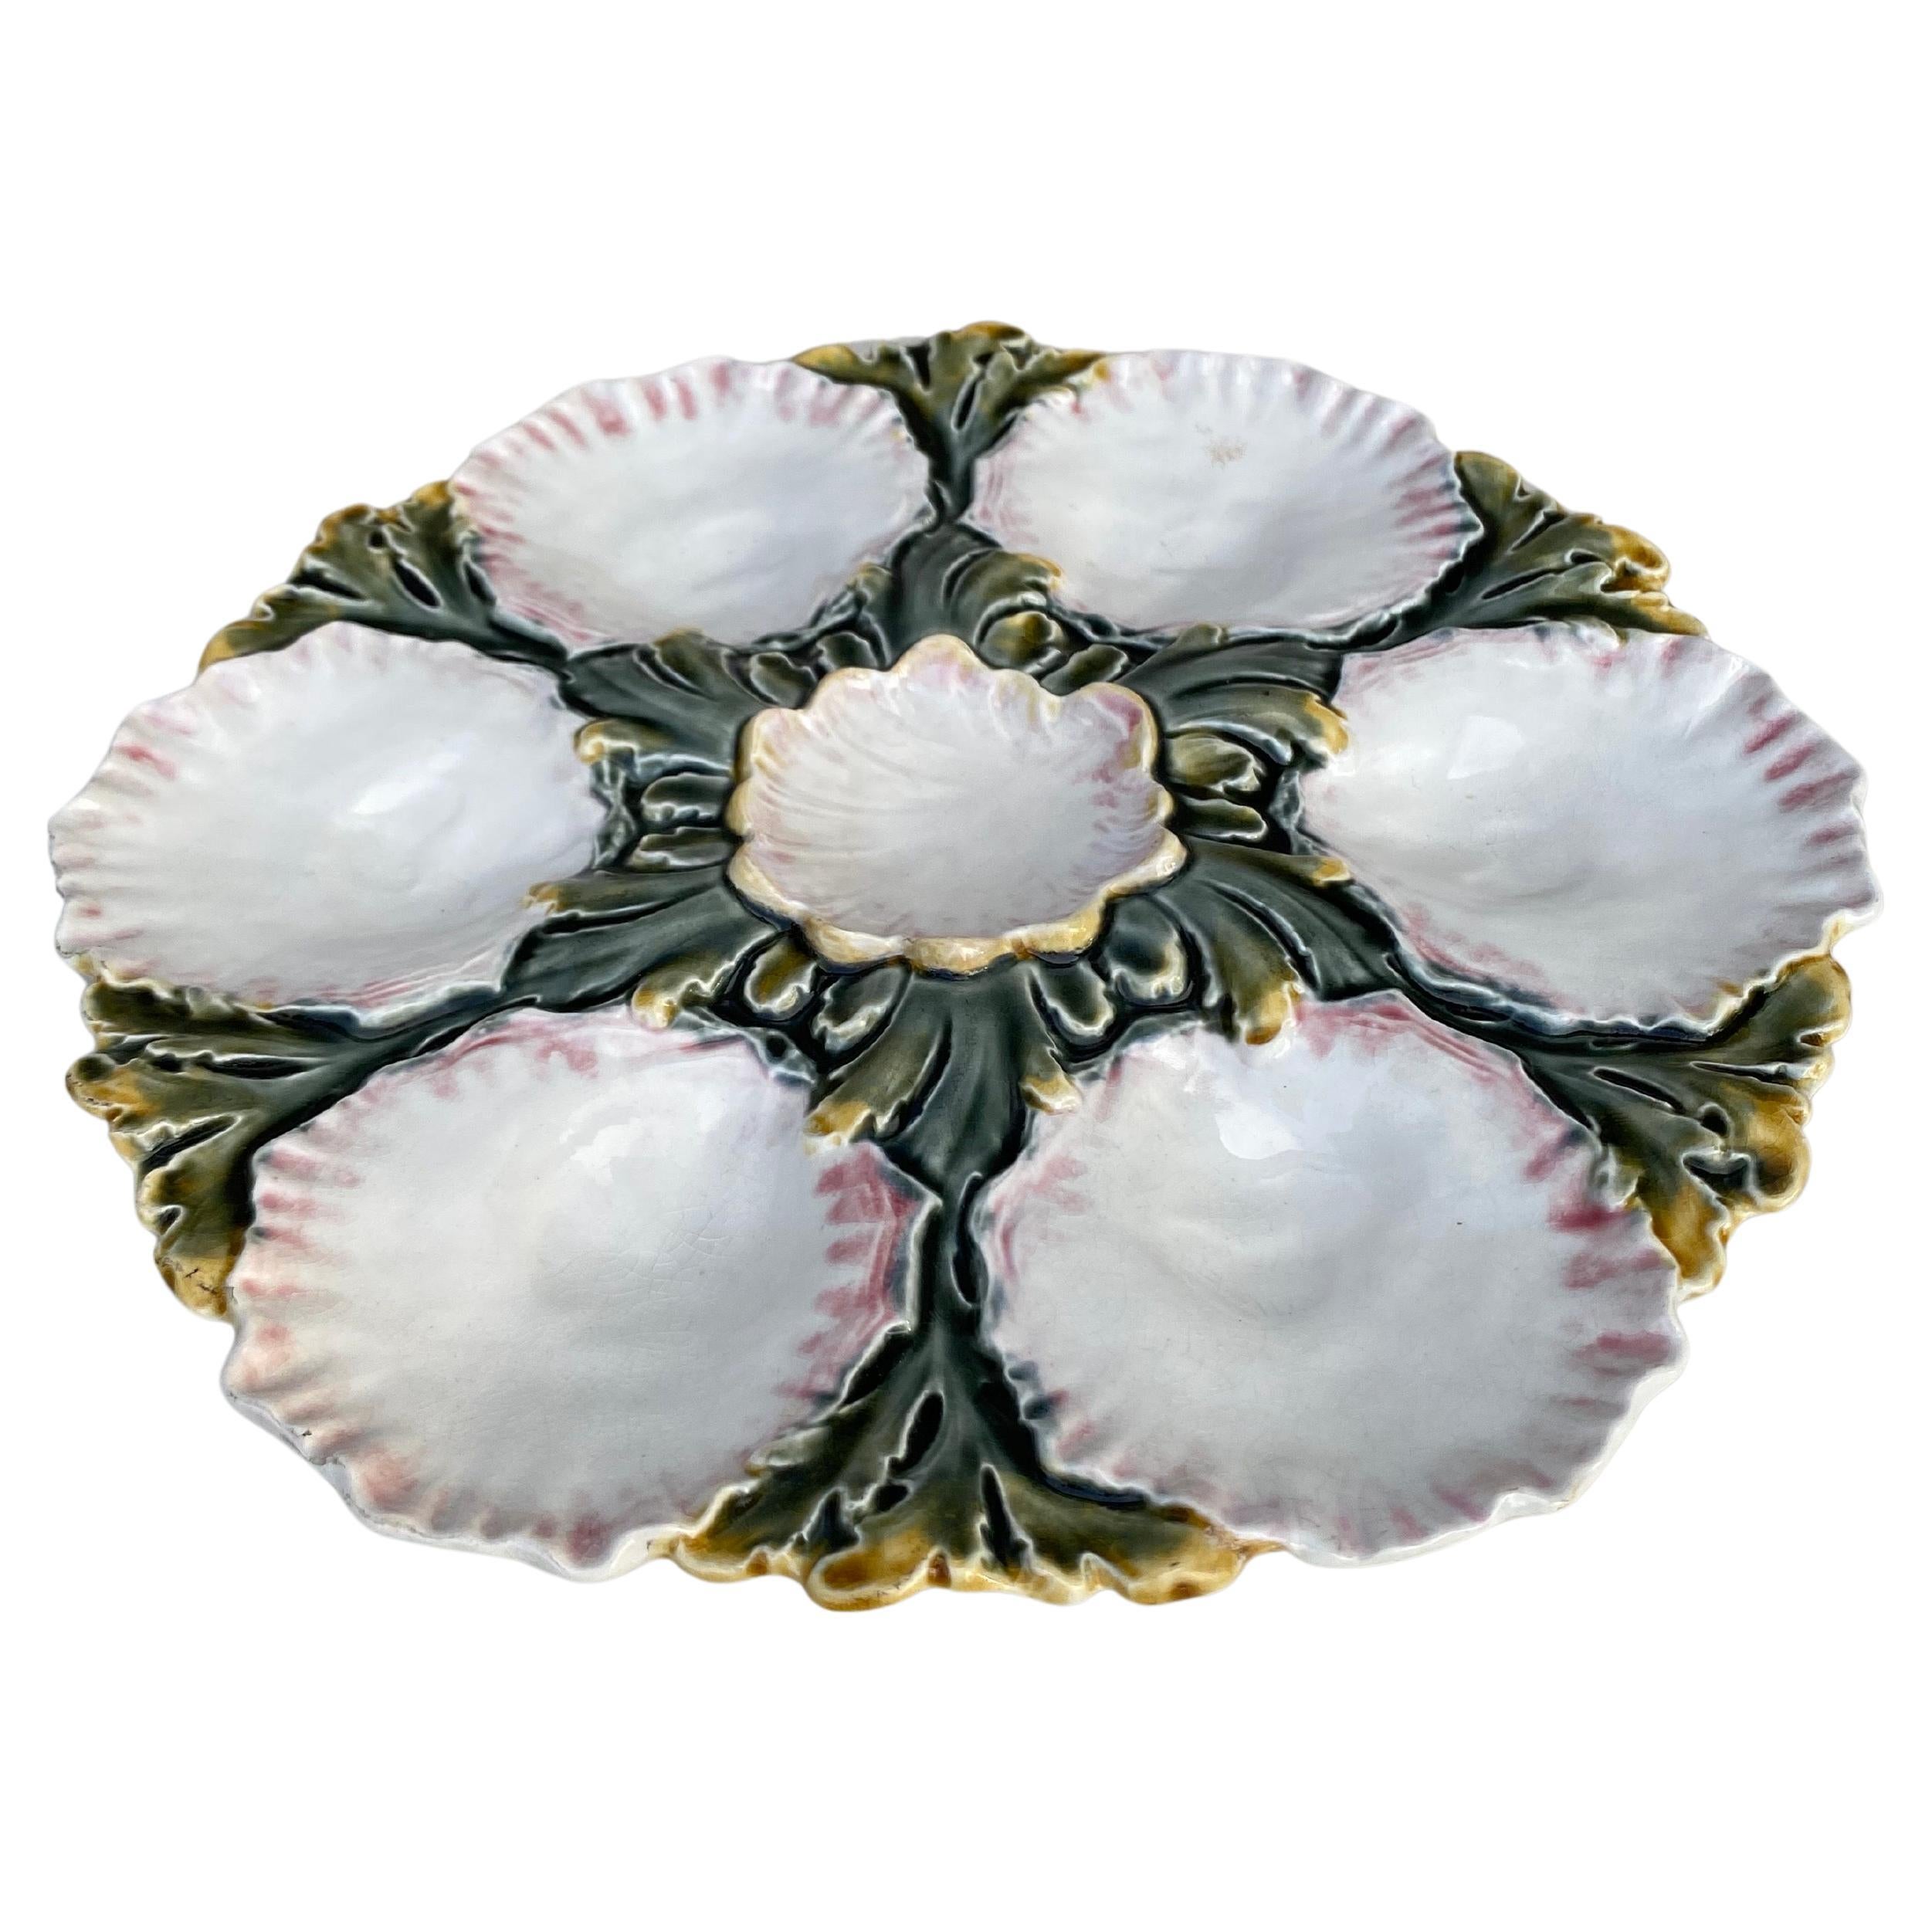 French Majolica oyster plate with green leaves, circa 1890.